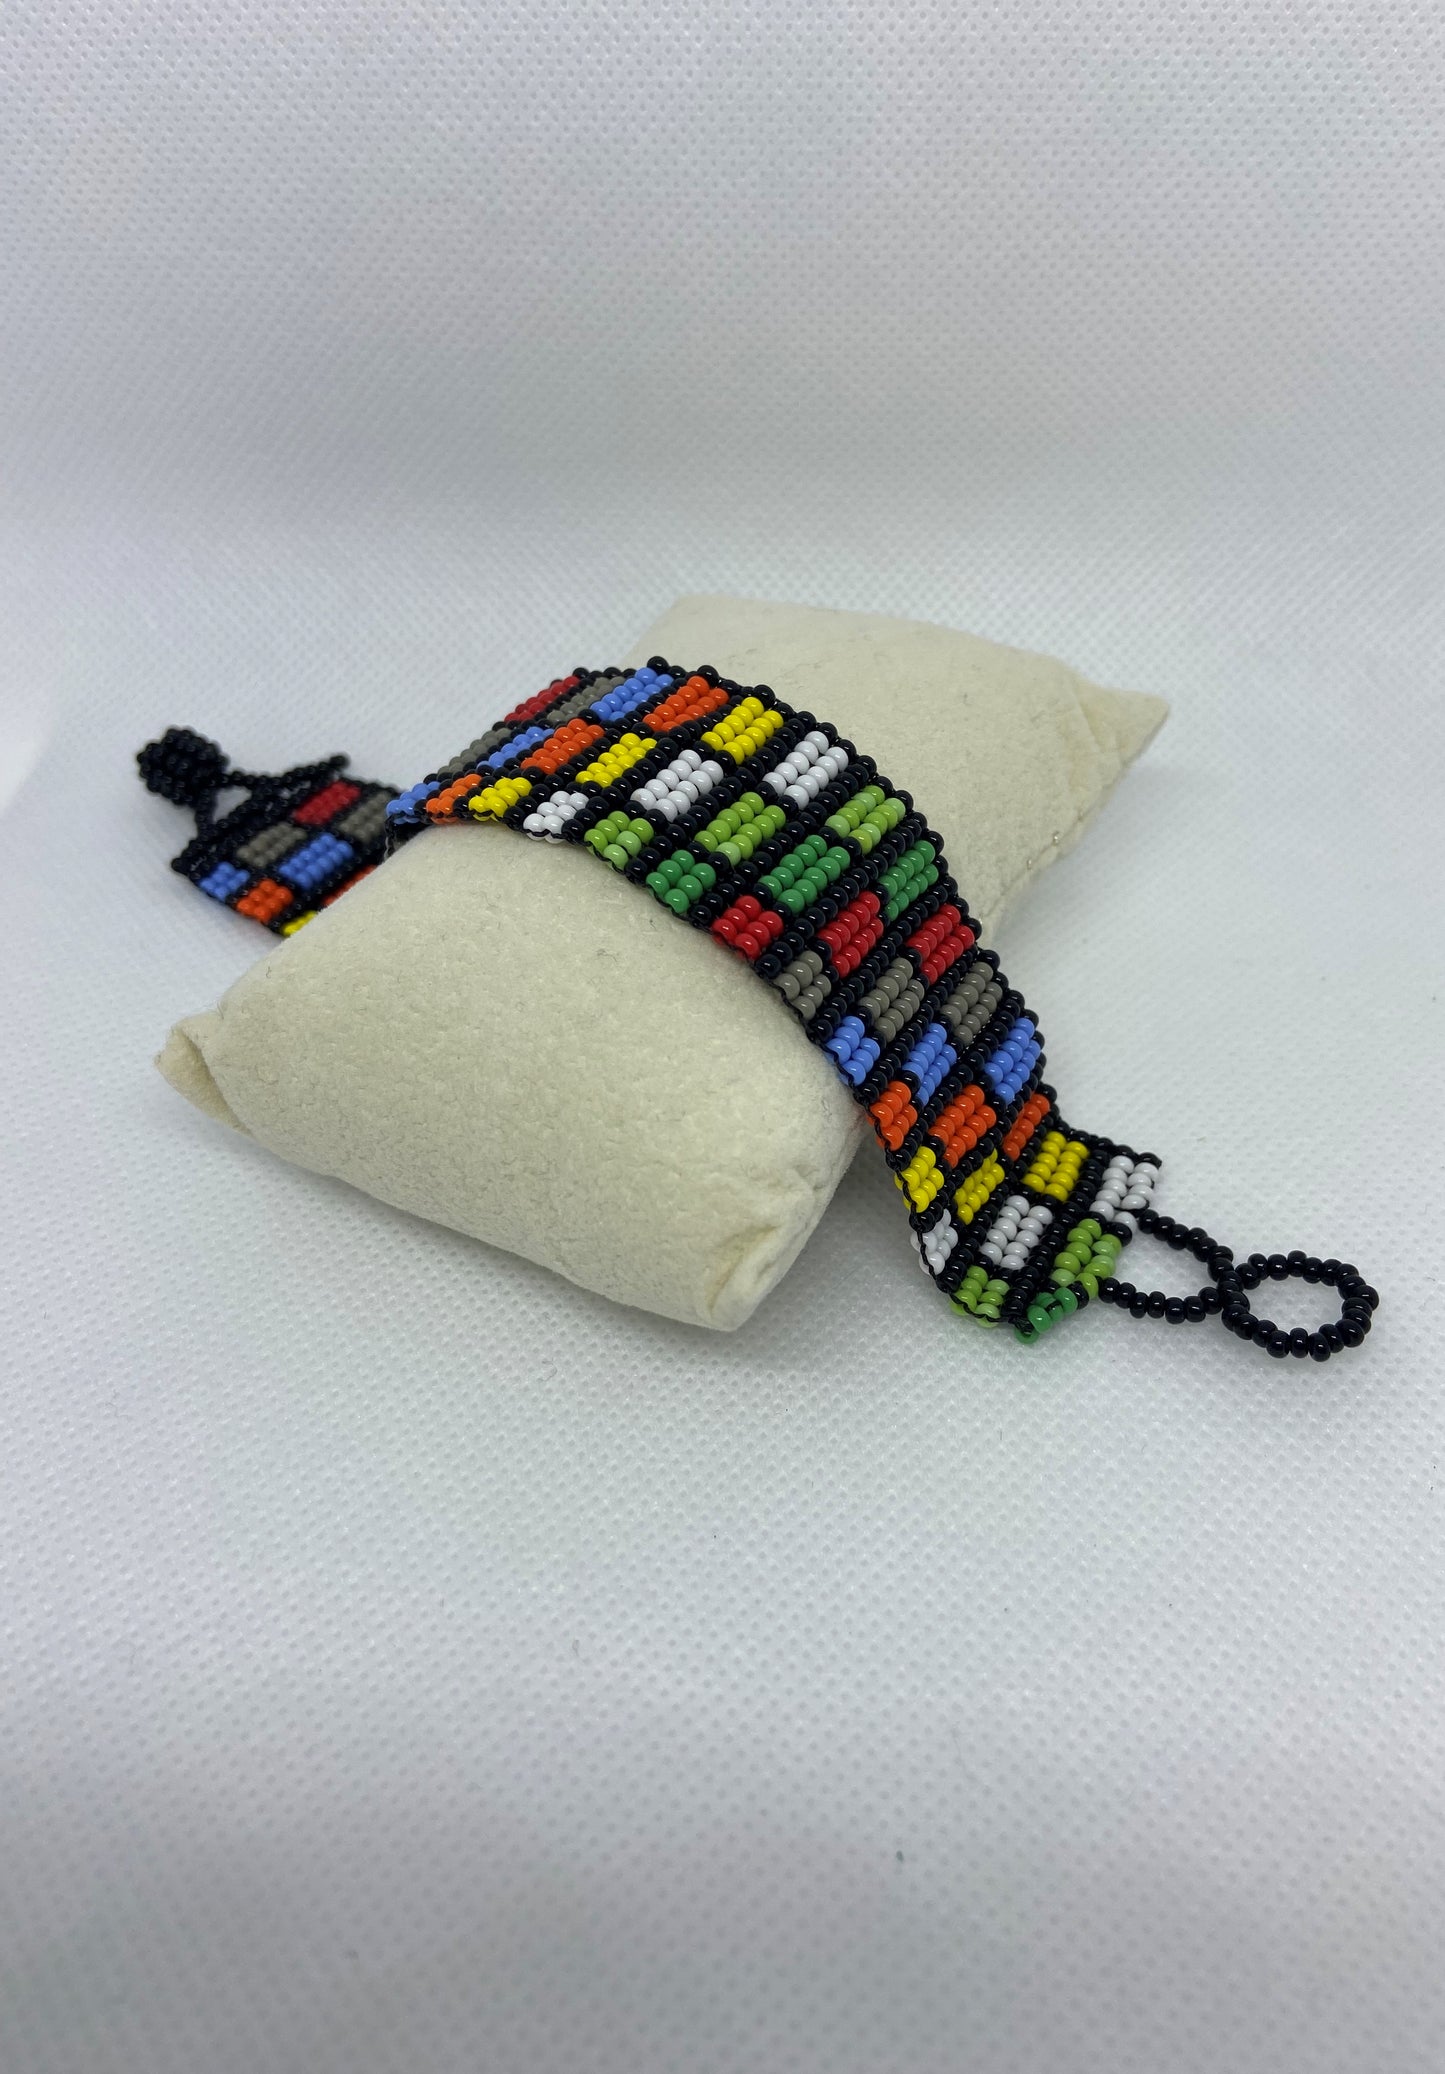 Chaquira bracelet made in form of little squares and colors